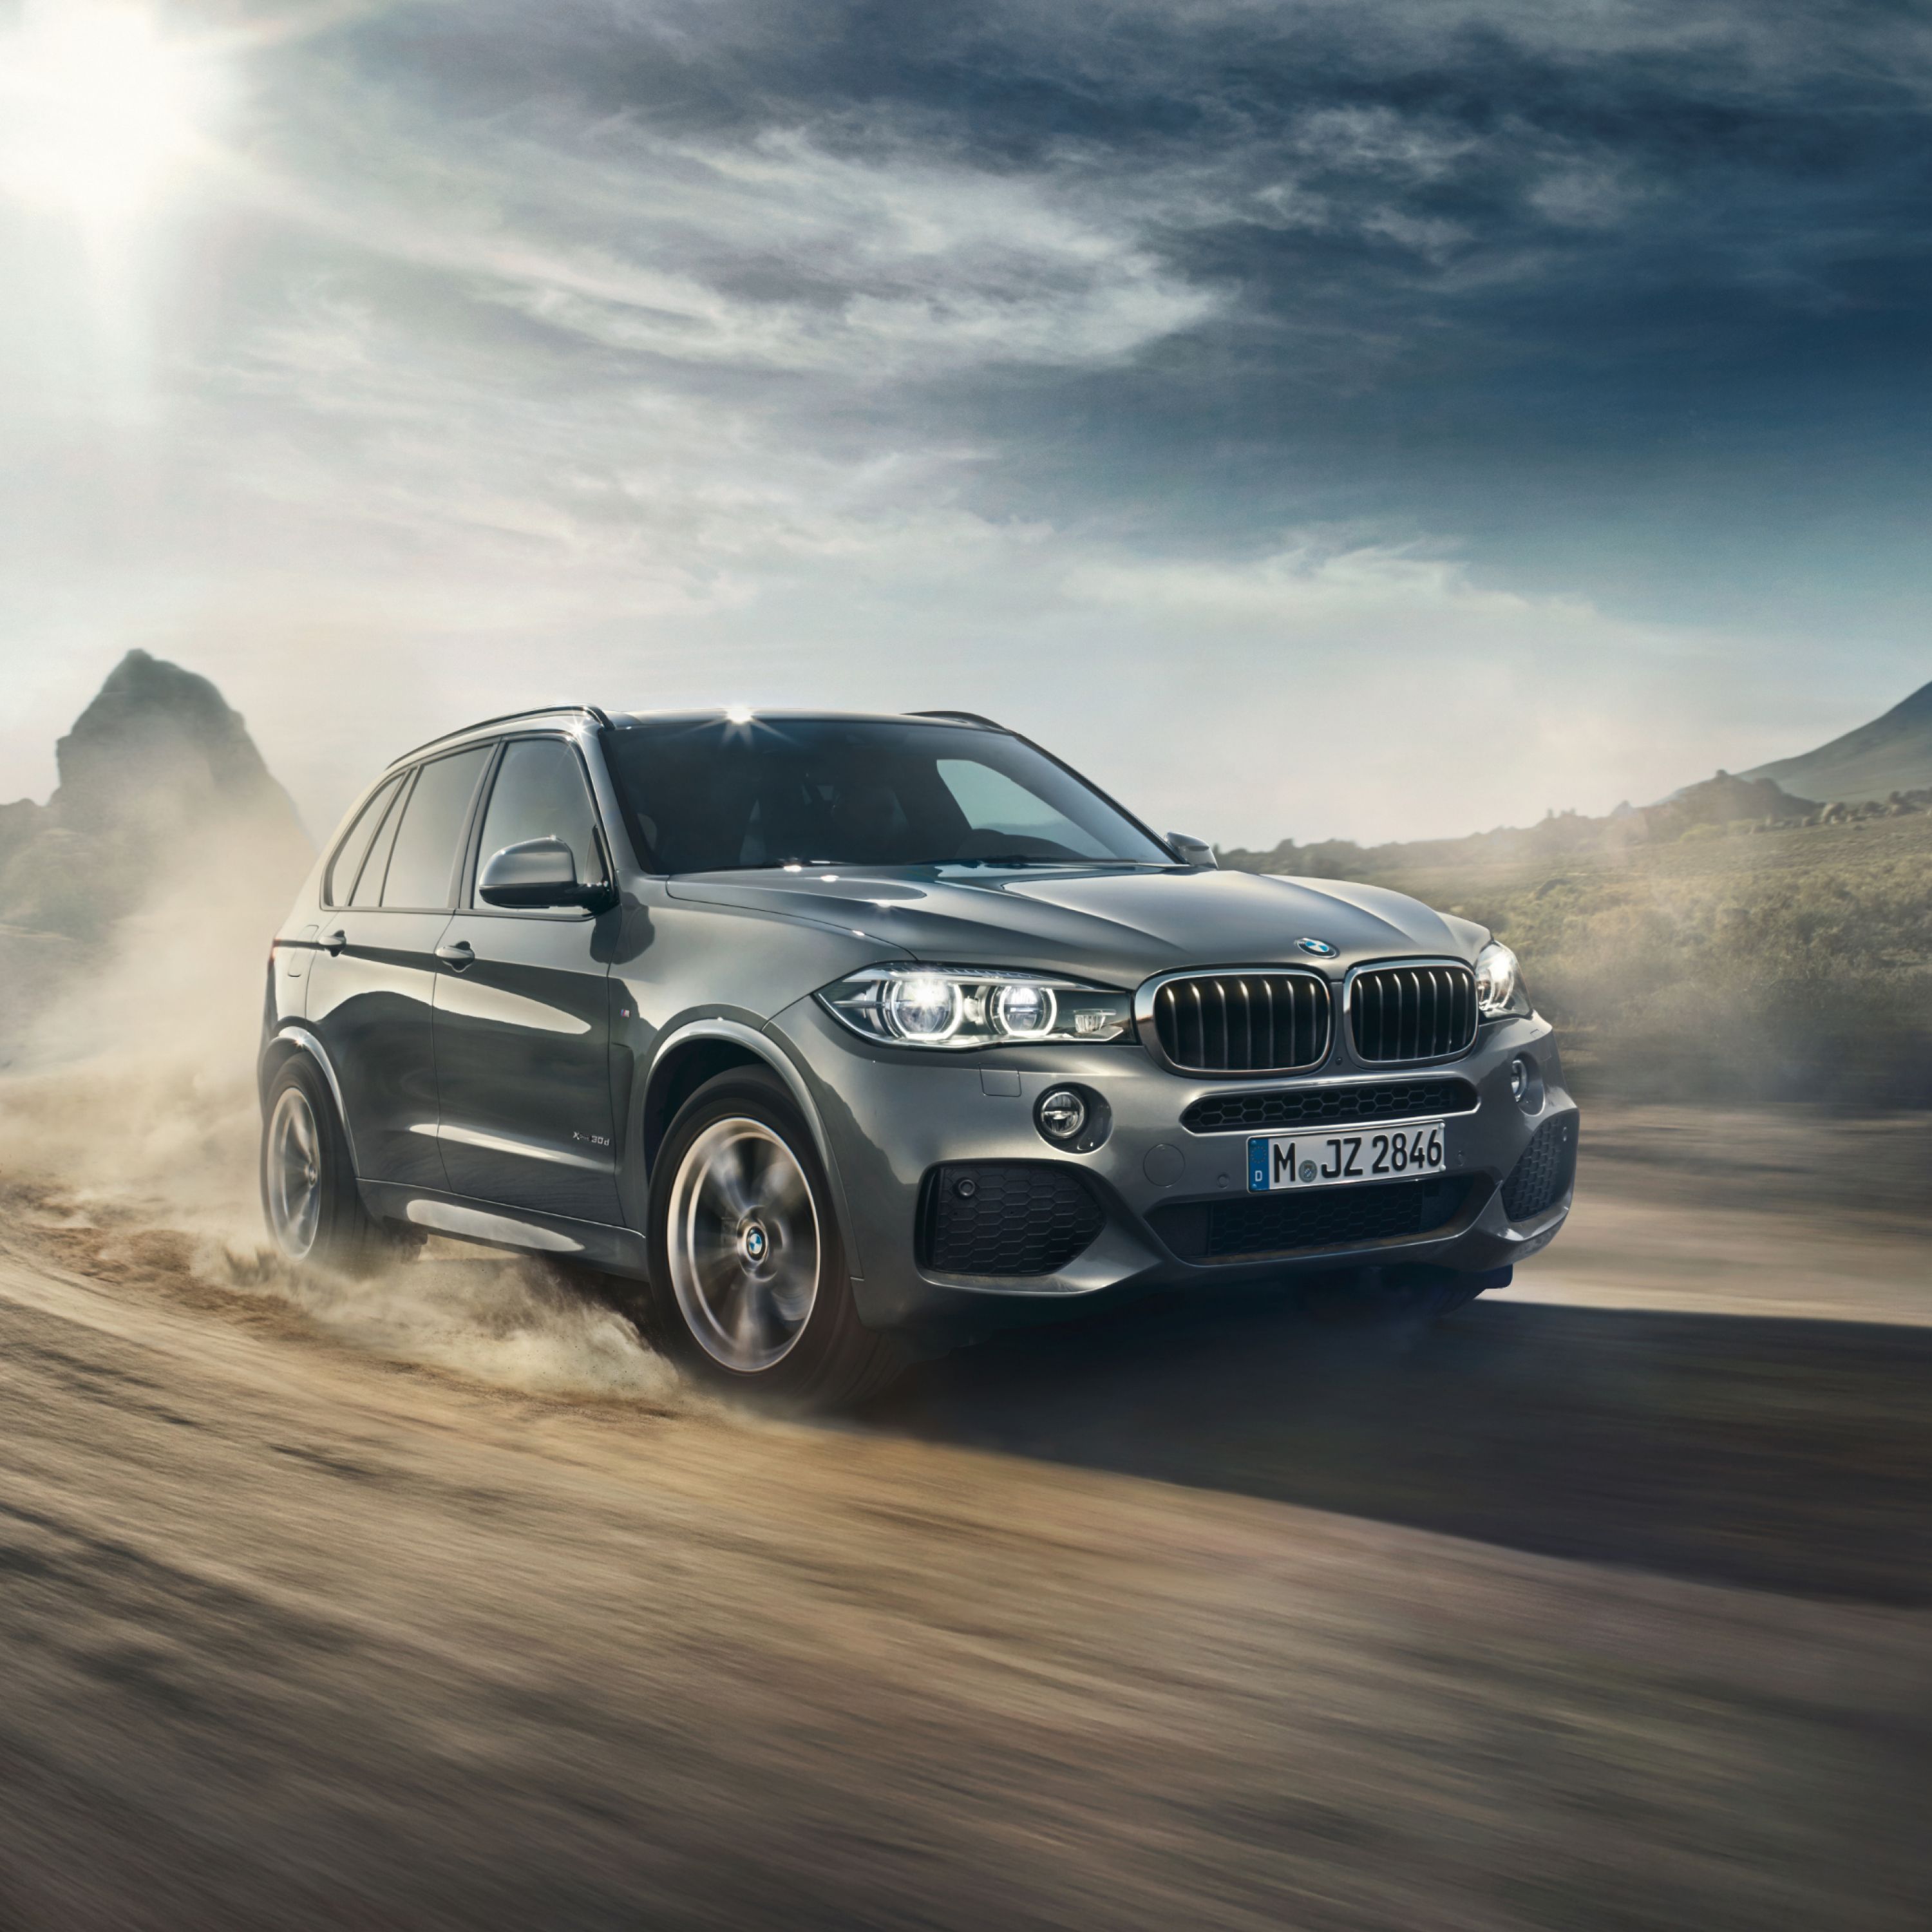 BMW X5 F15 SUV with a dust trail behind it on a track in the wilderness